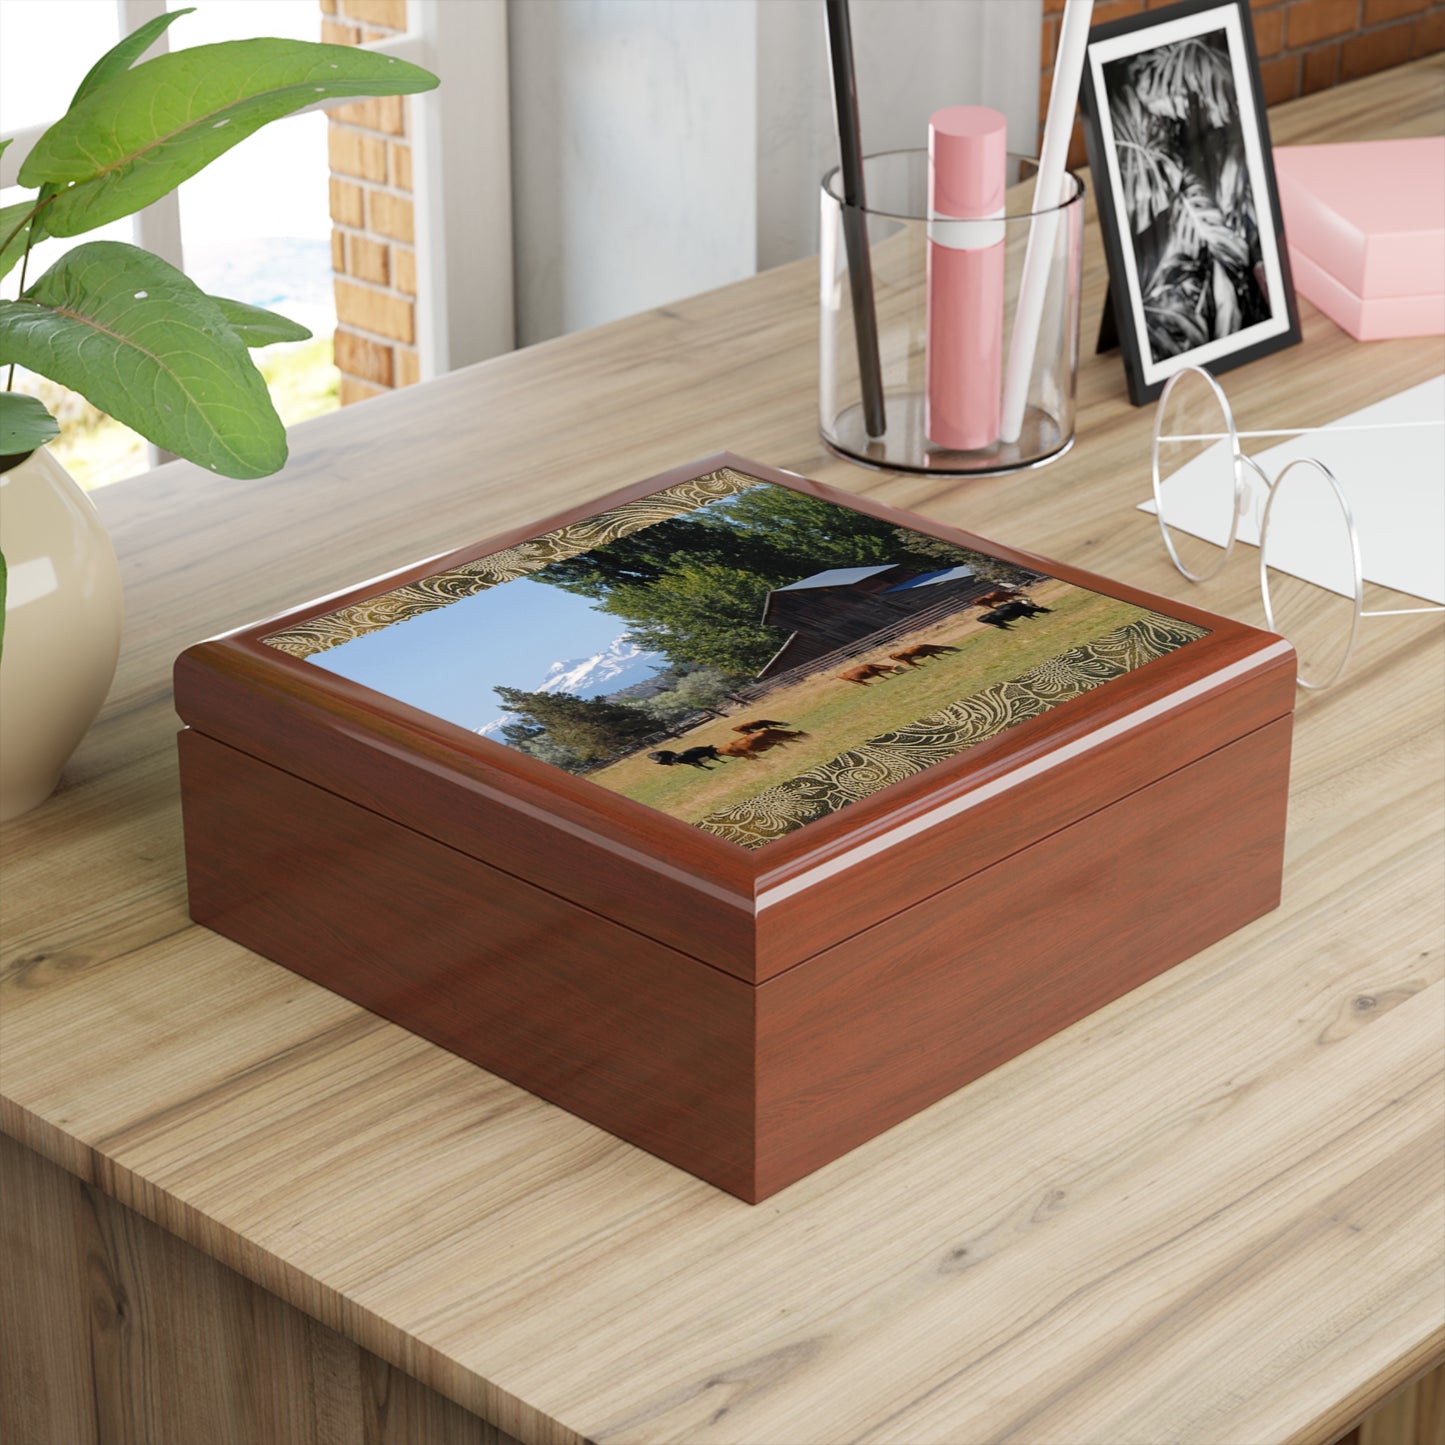 Picturesque Cattle Jewelry Box ~ 7.24"